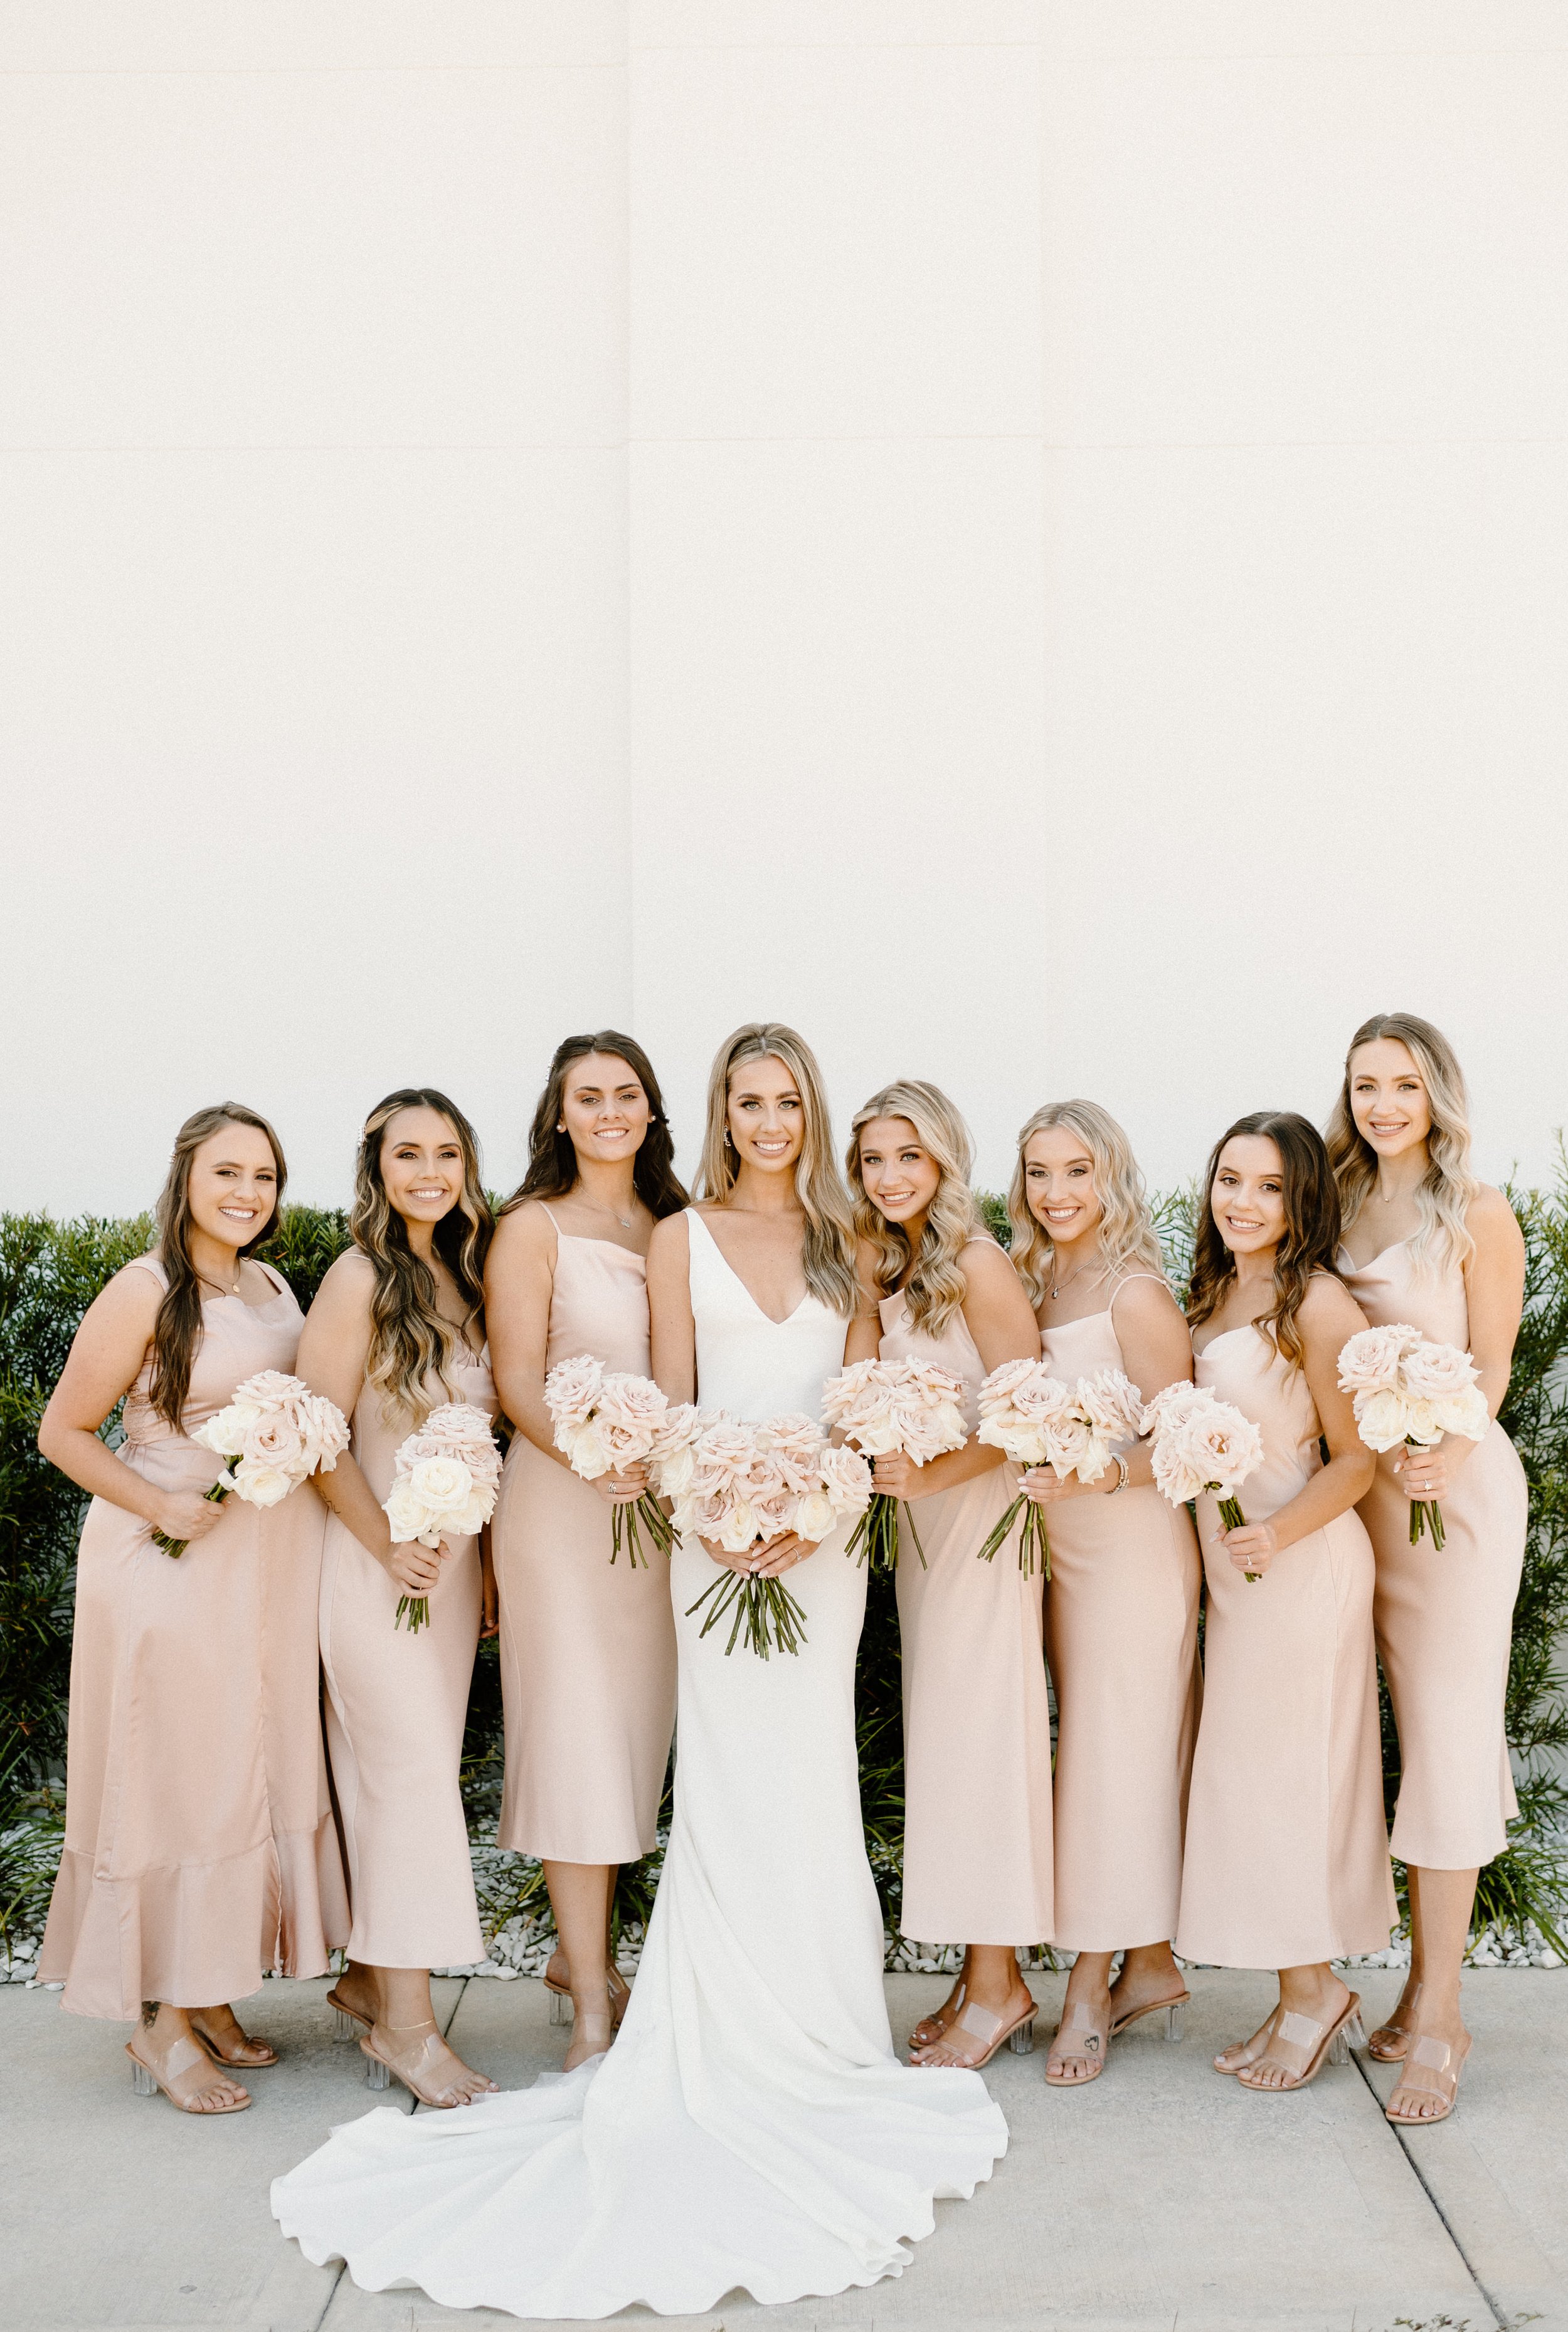 Down for the Gown: Kalin — Ivory & Beau